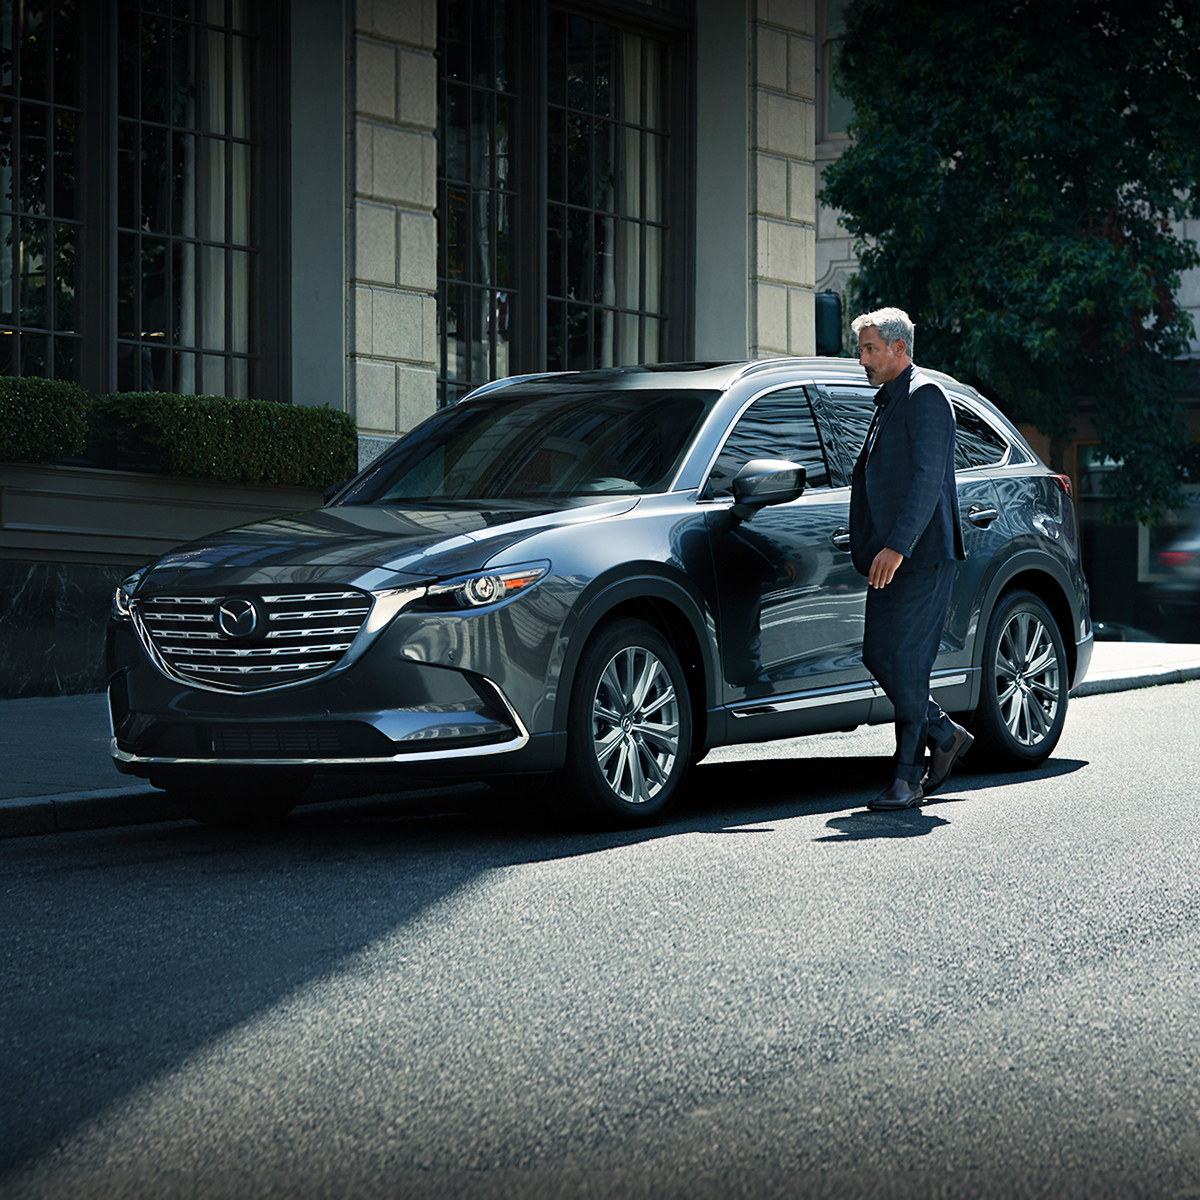 2021 Mazda CX-9 parallel parked